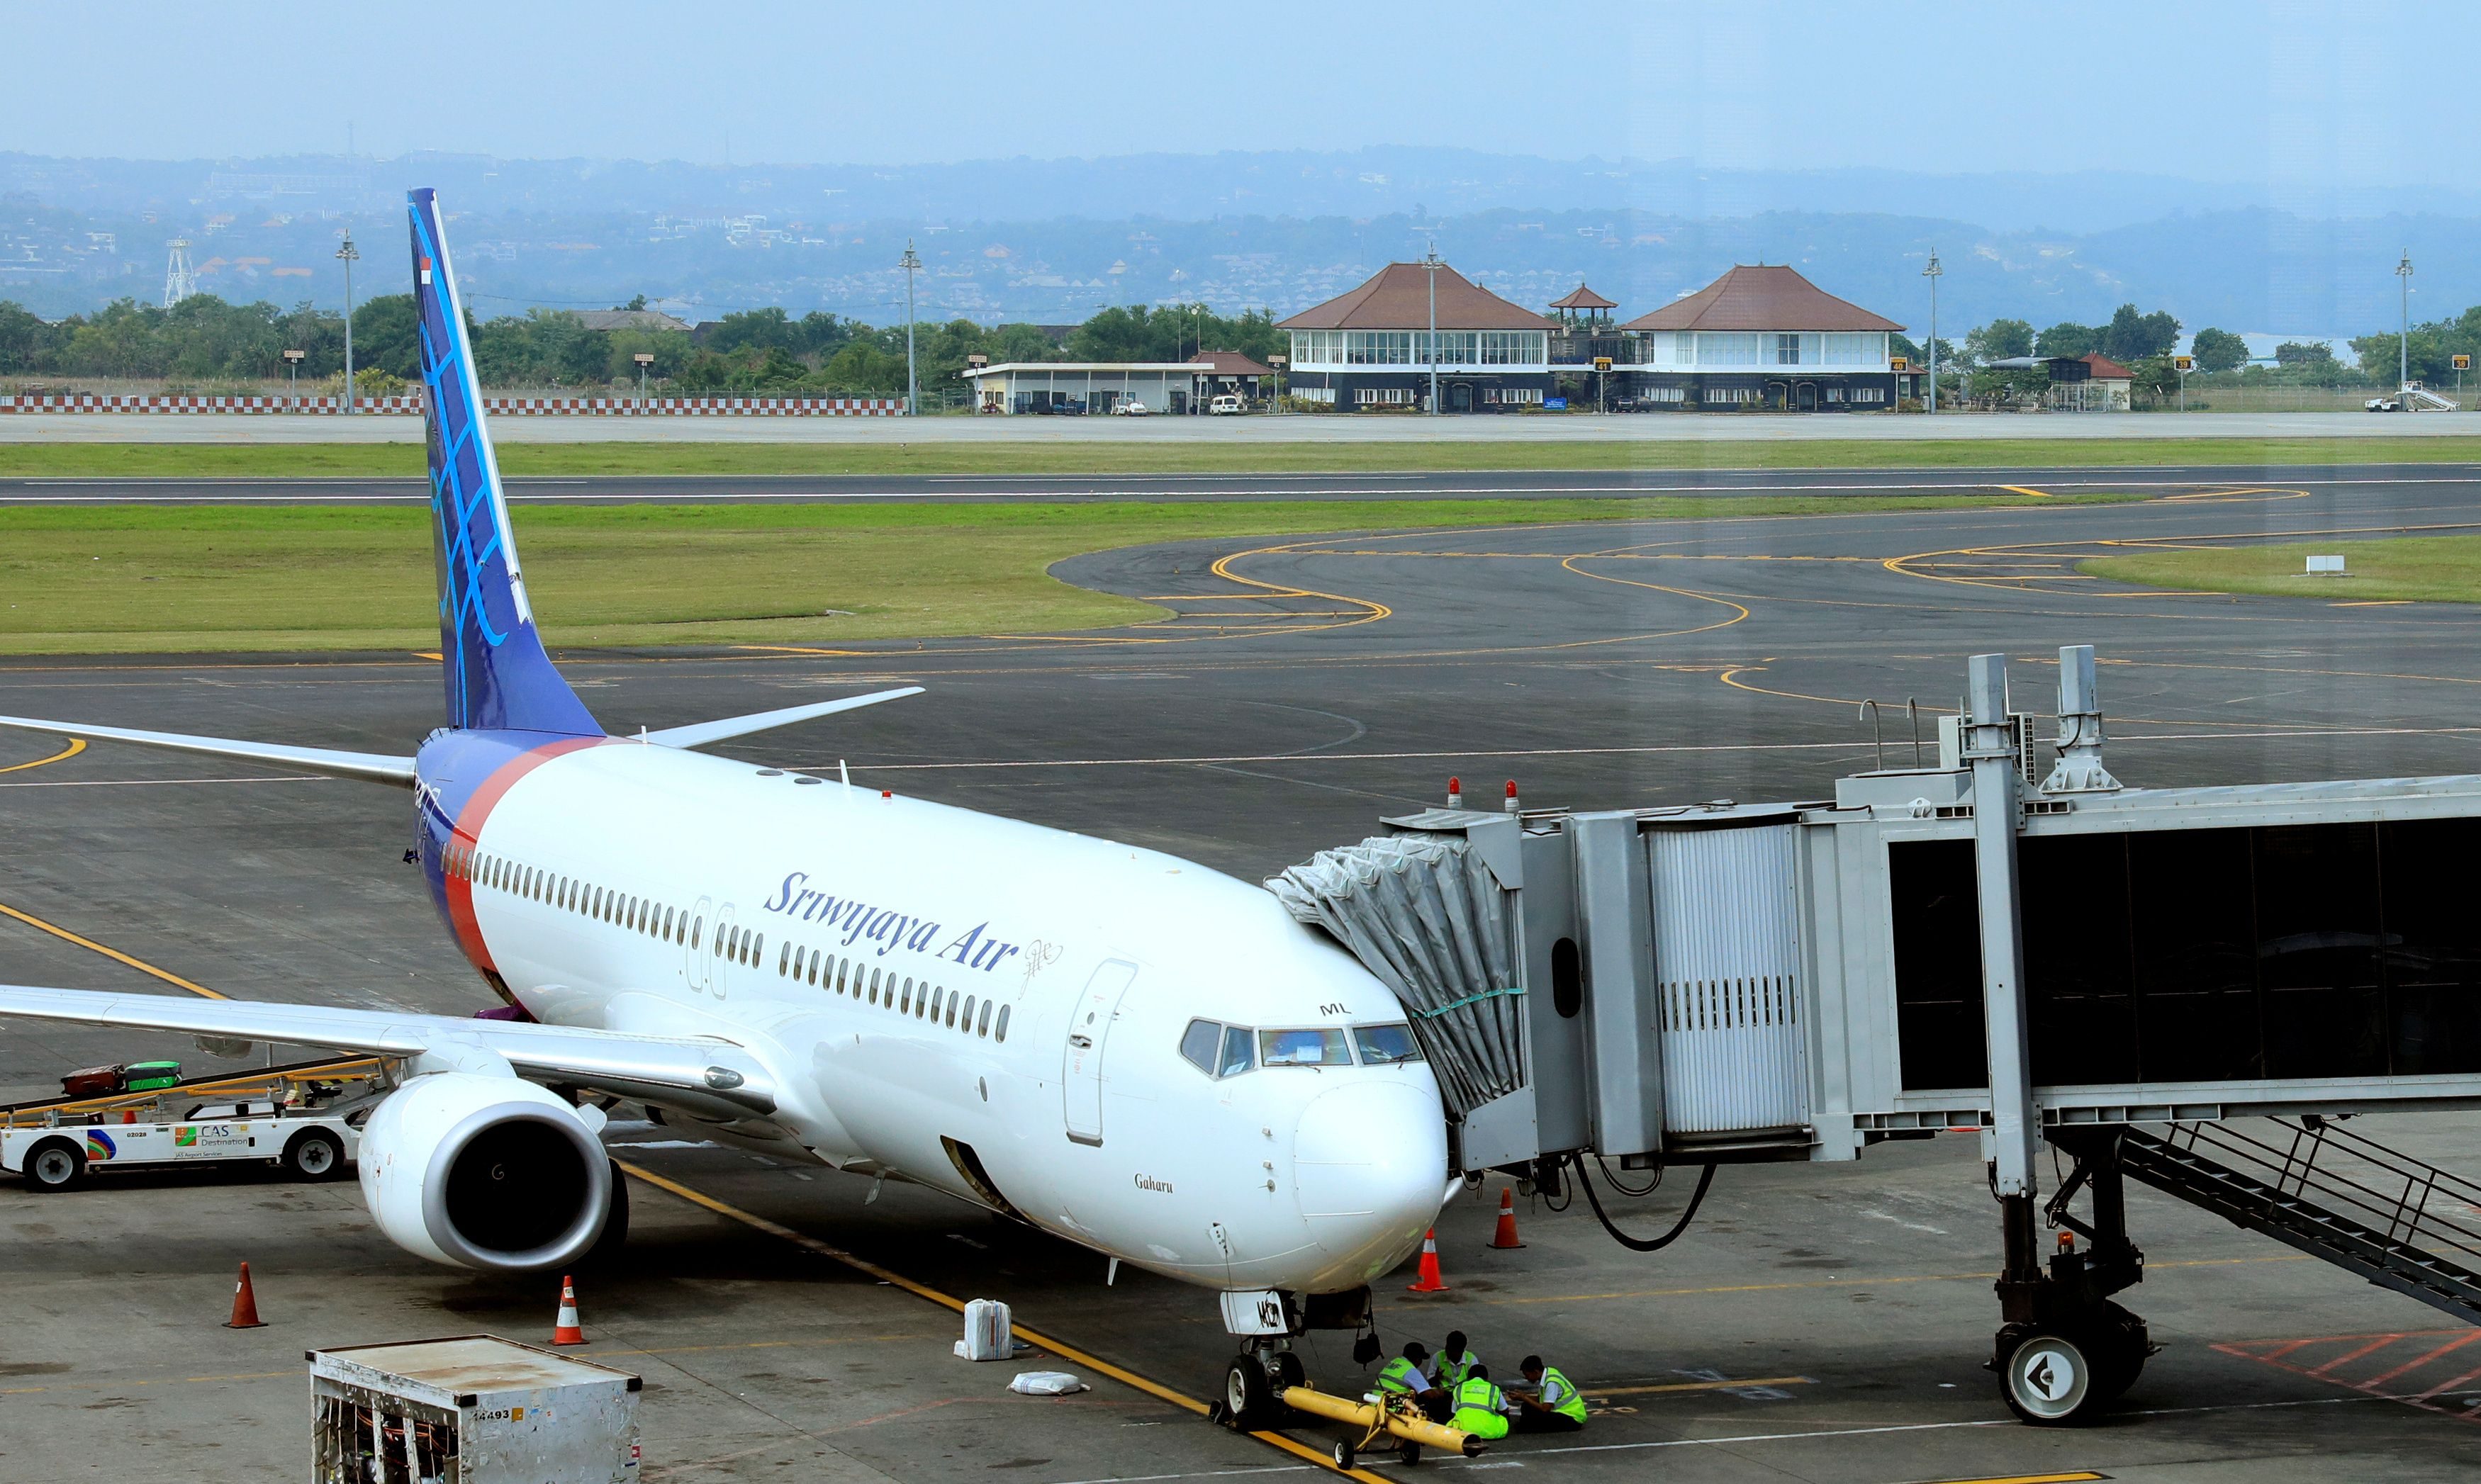 Indonesia’s Sriwijaya flew old planes, served neglected routes to become No. 3 carrier